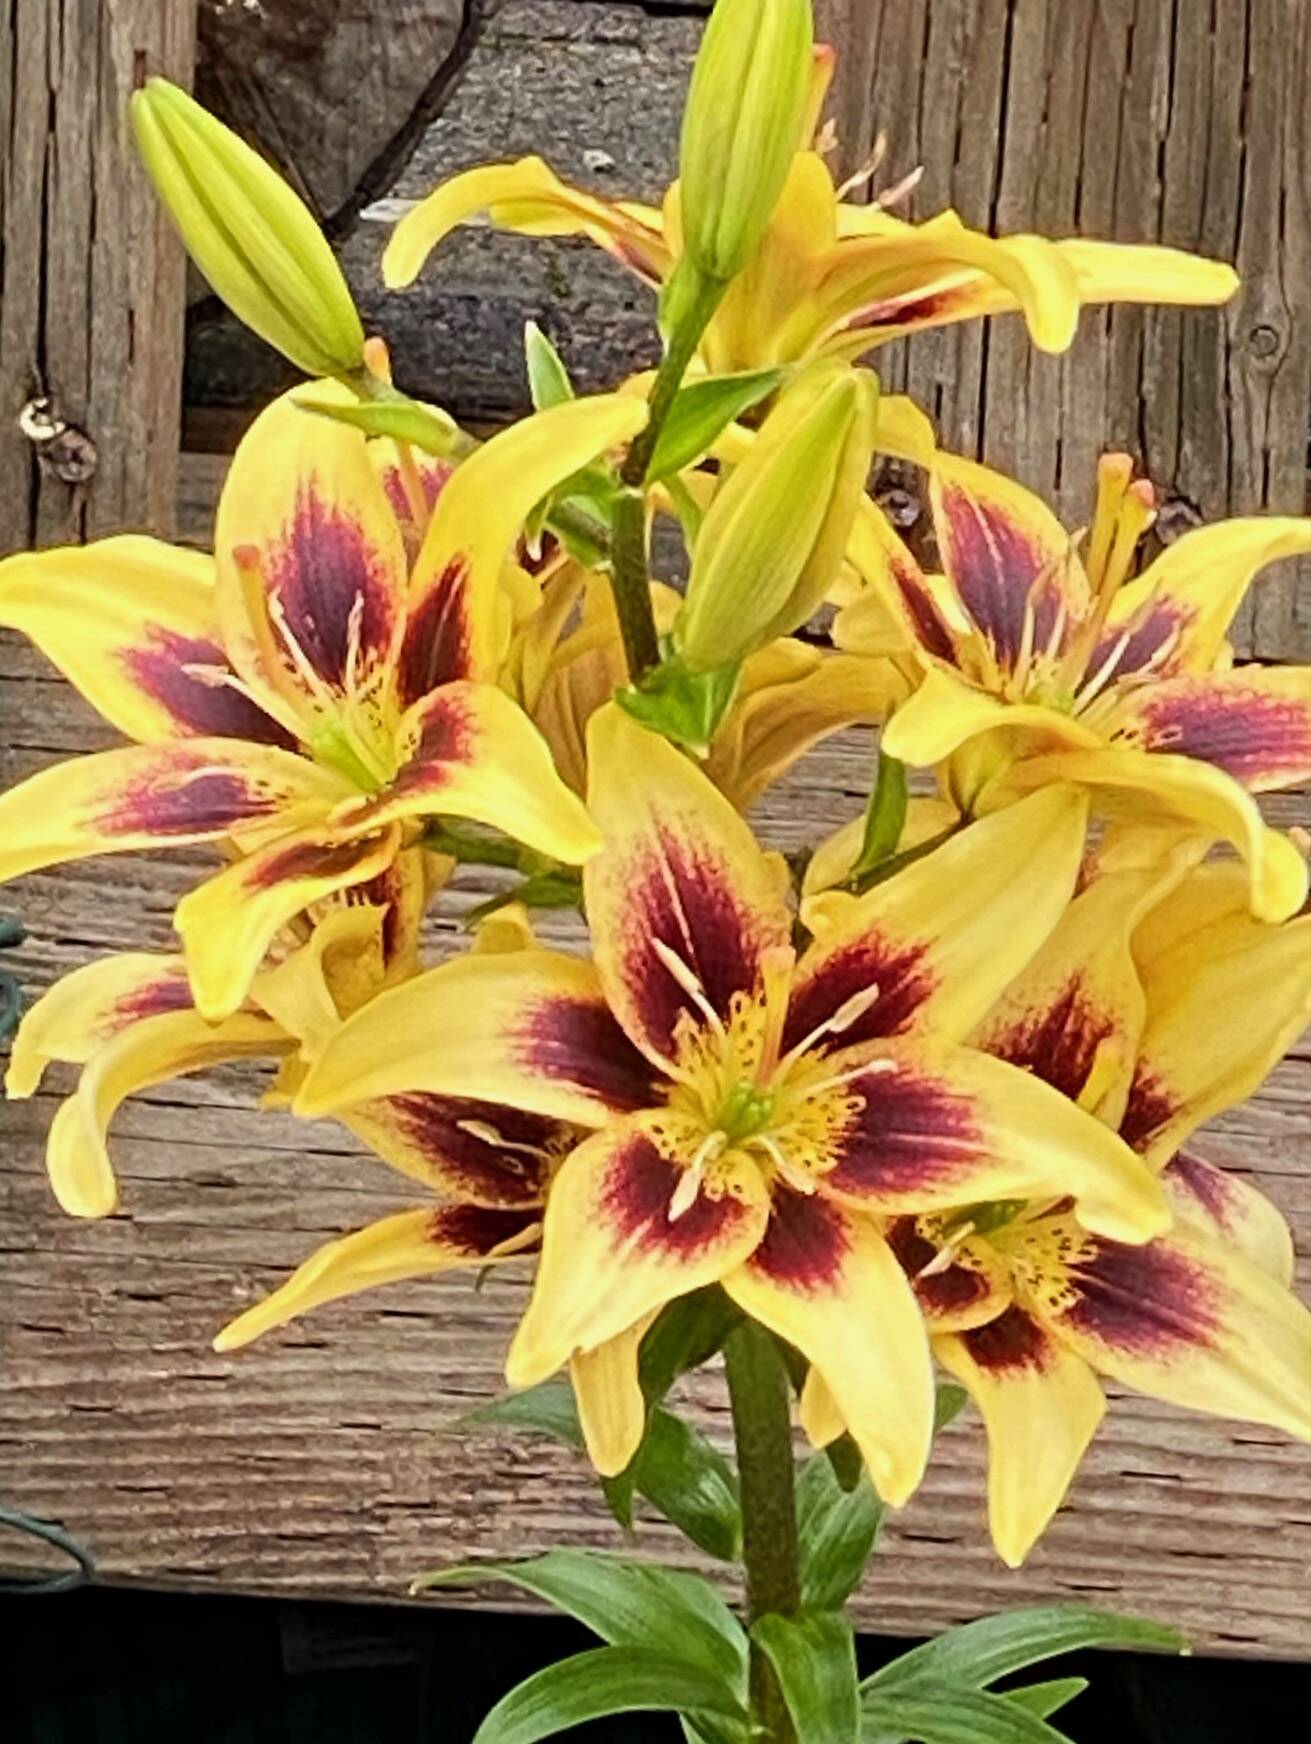 Vibrant lilies bloom in a garden in the downtown flats Aug. 3. (Photo by Denise Carroll)